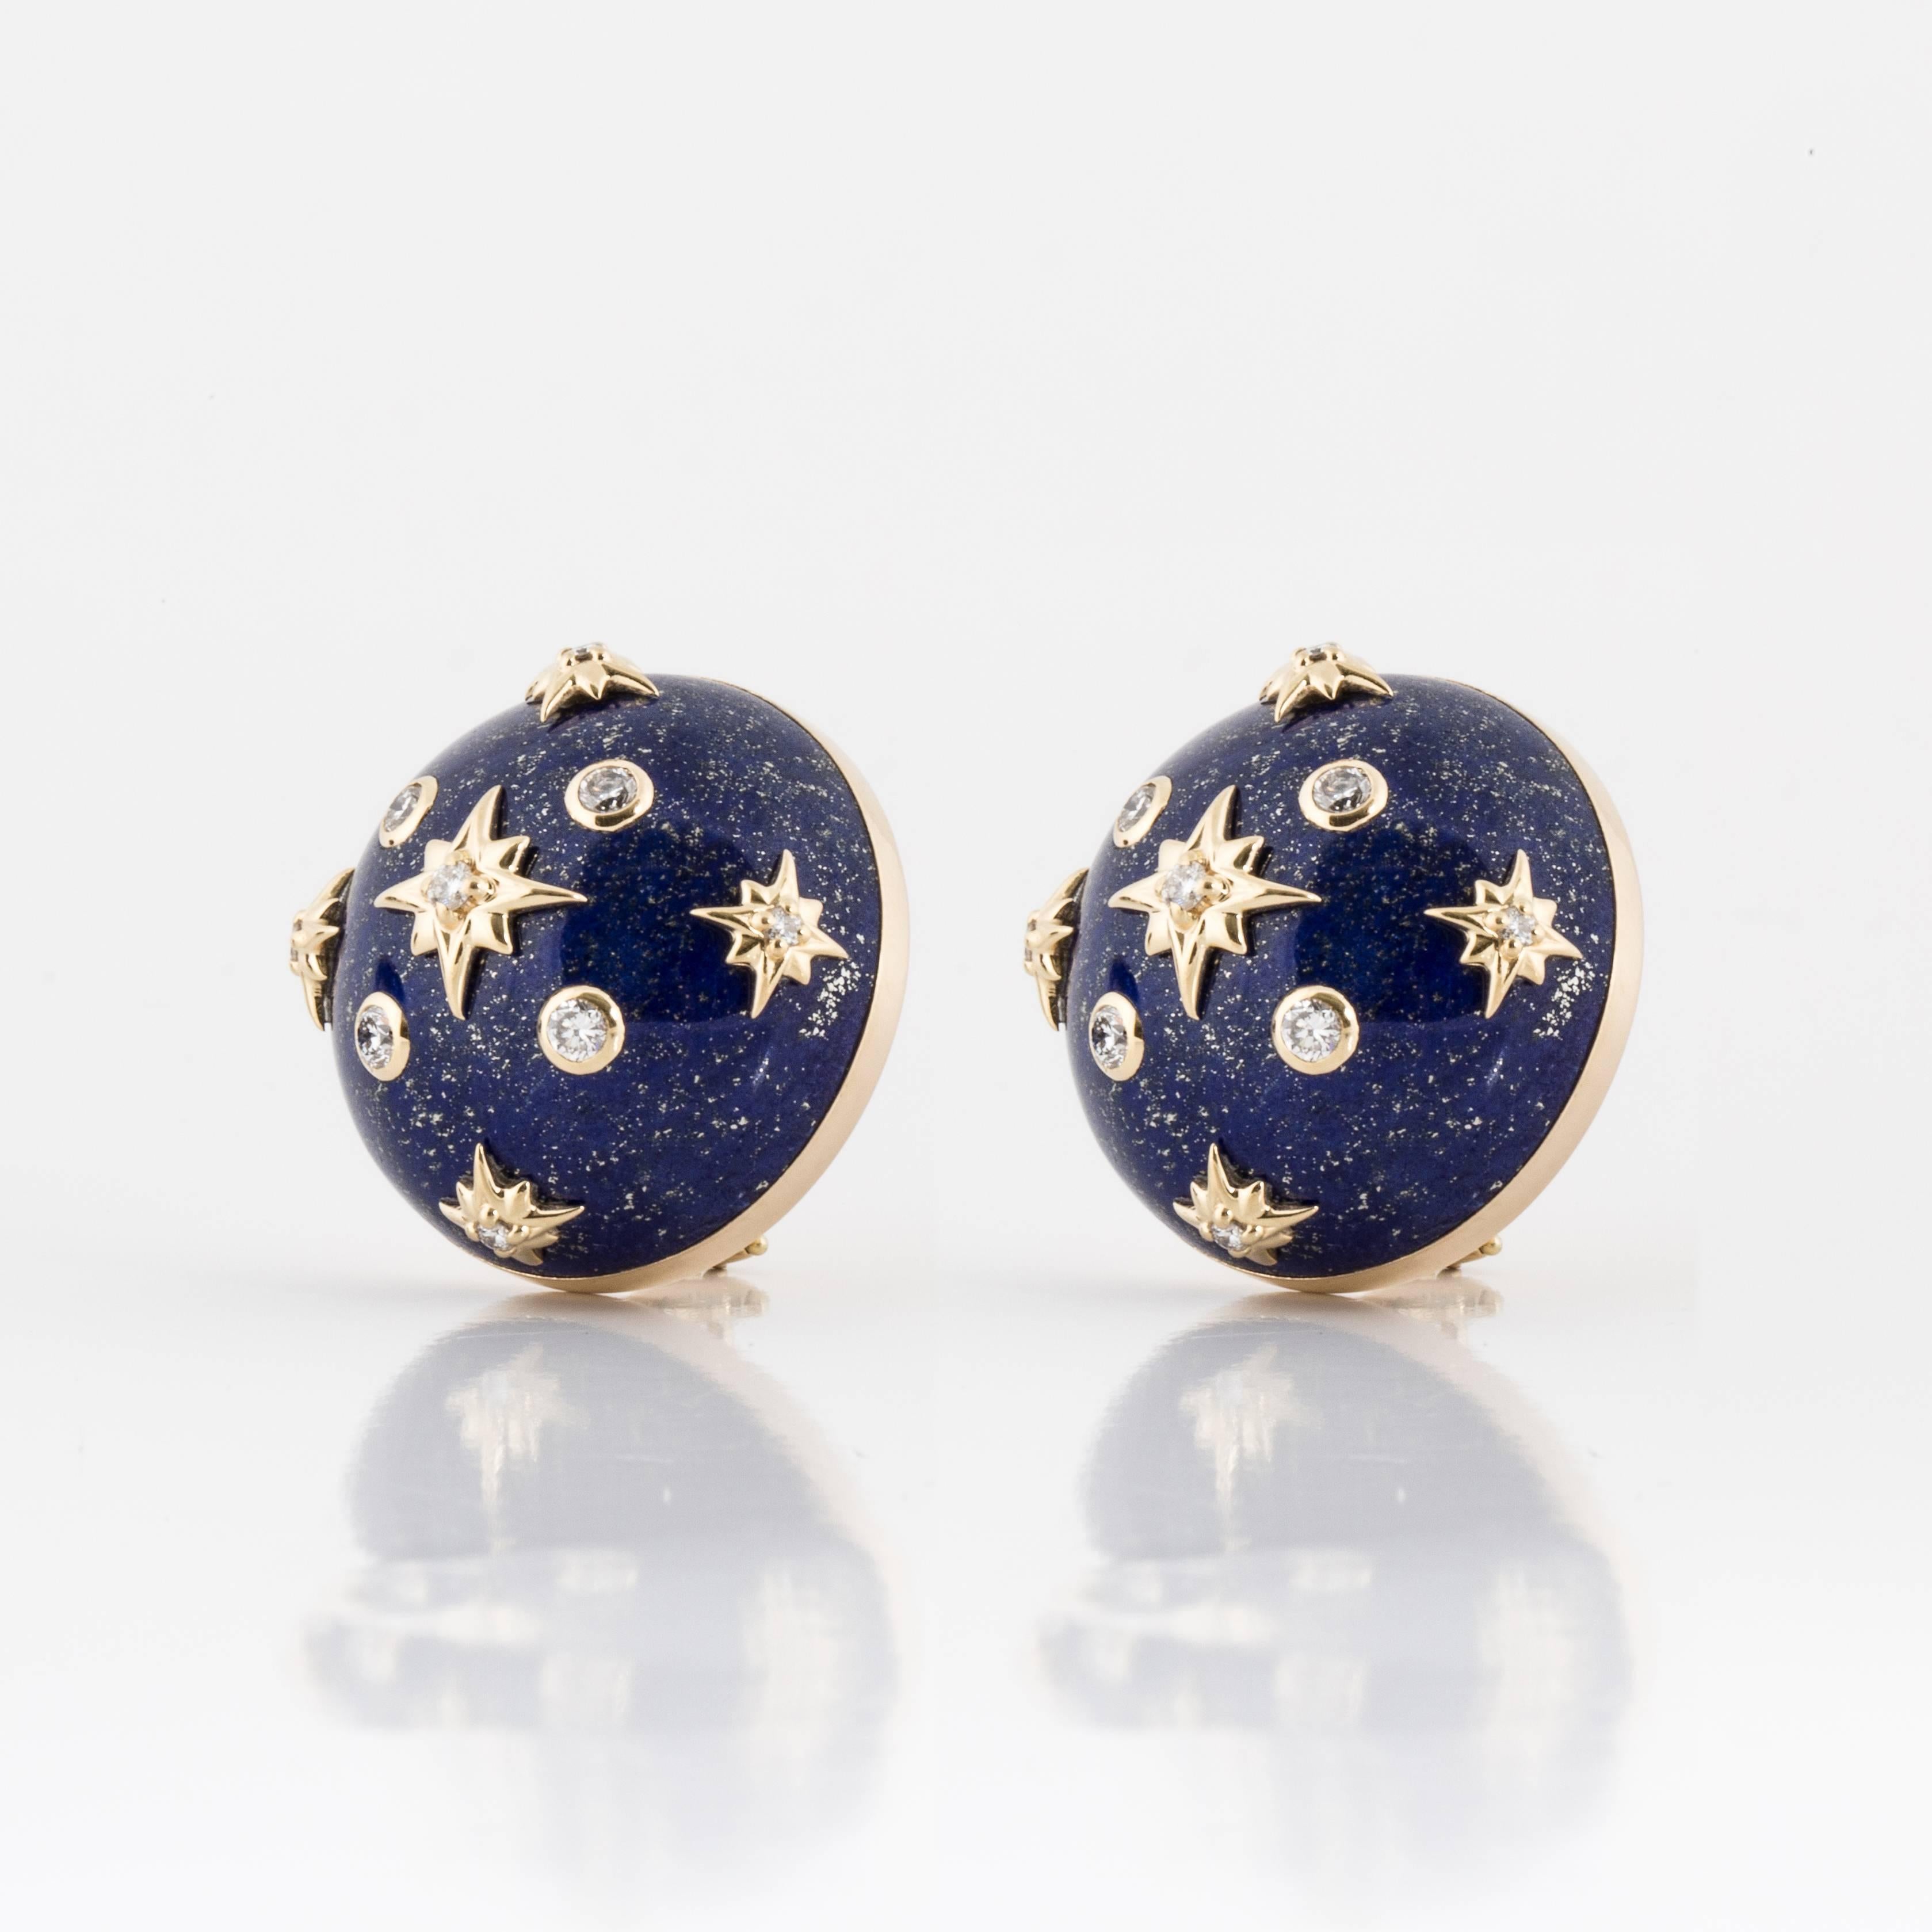 These Trianon earrings are composed of 18K yellow gold with lapis and diamonds.  They are marked 